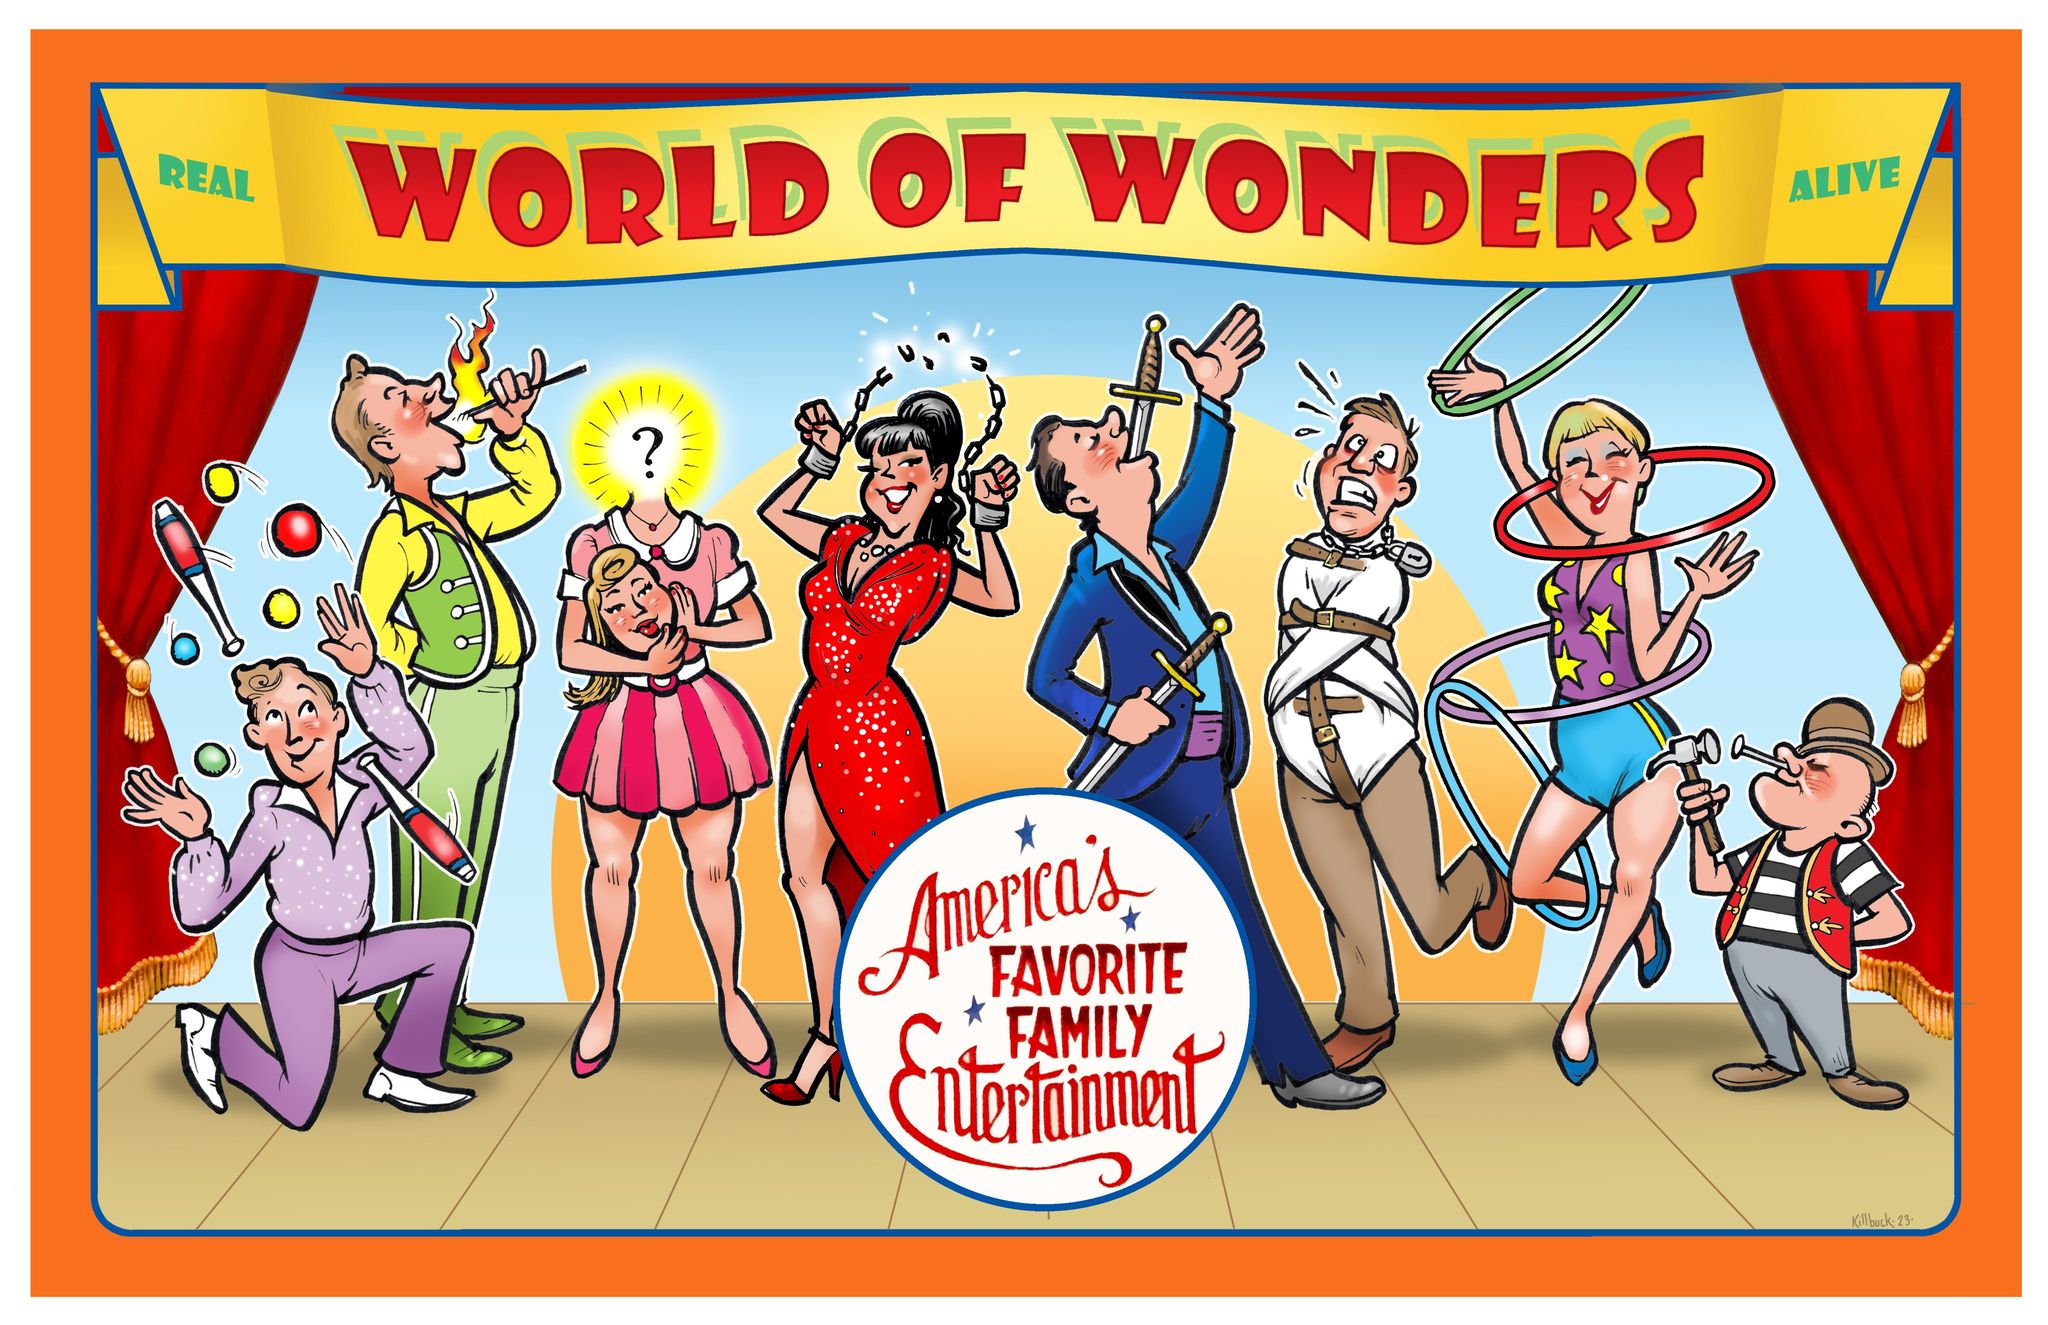 Poster of World of Wonders performers for sale at World of Wonders